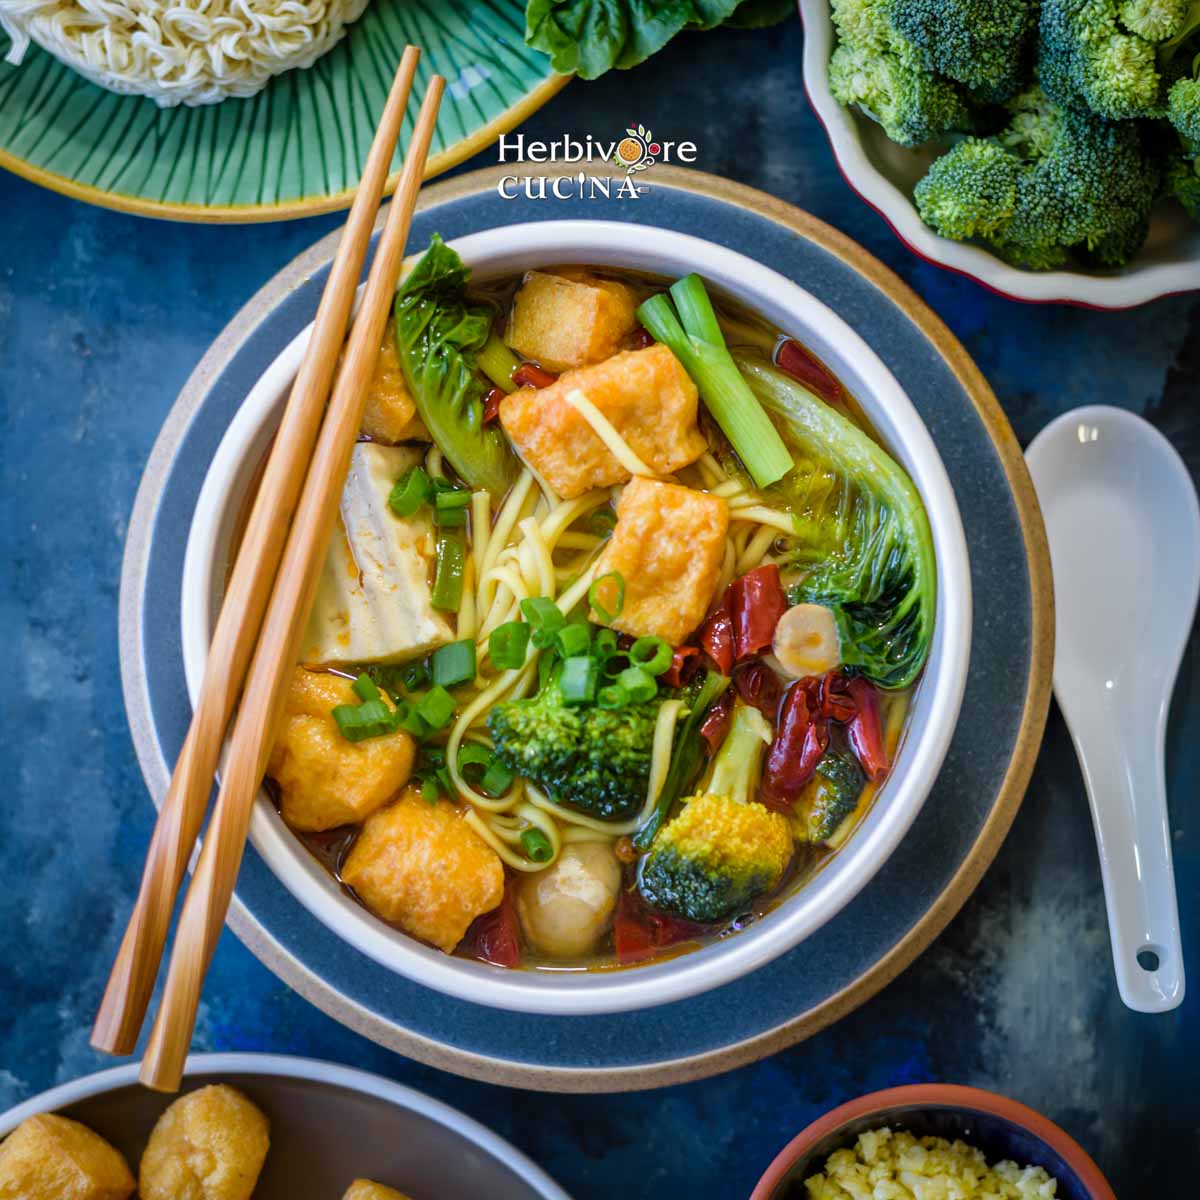 A mix of spicy Hot Pot broth with broccoli, tofu, noodles in a bowl with chopsticks. 